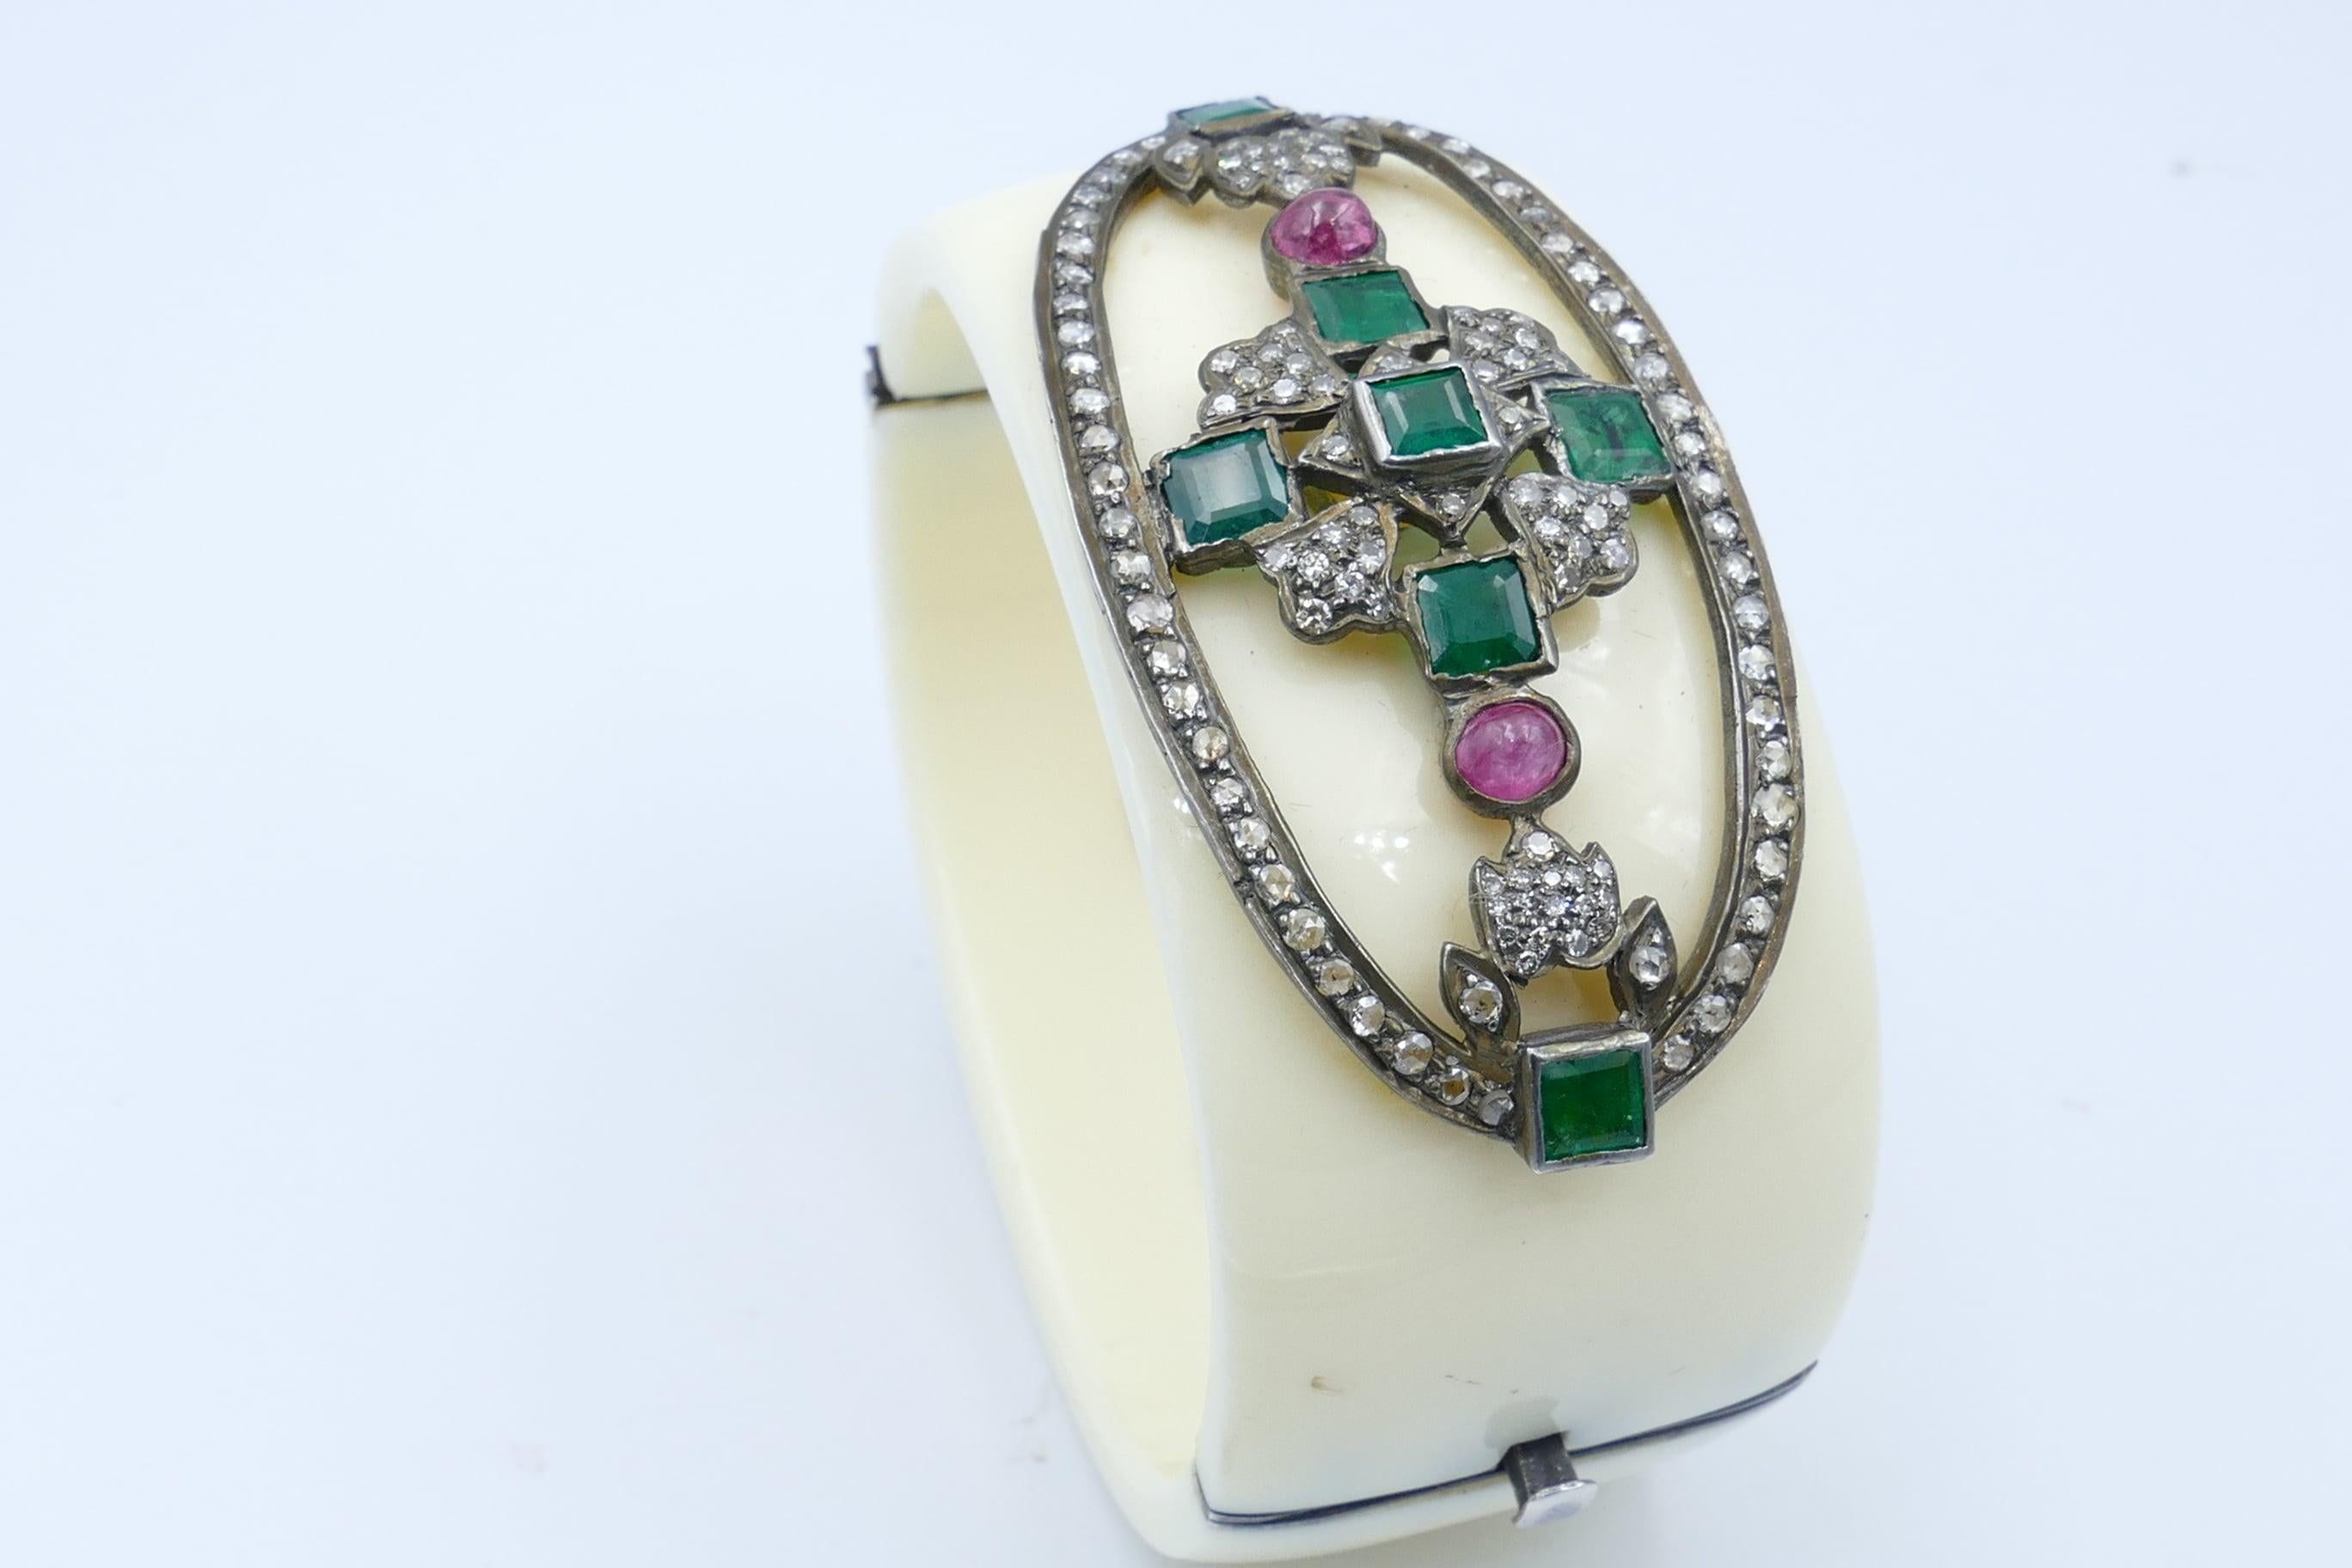 Such a different and hard to find Bangle consisting of 7 bluish-green Emeralds, 2 pretty pink cabochon cut Sapphires with a further 124 round brilliant single cut Diamonds.
It all makes up such a pretty, pretty top pattern.
The Bangle is a good